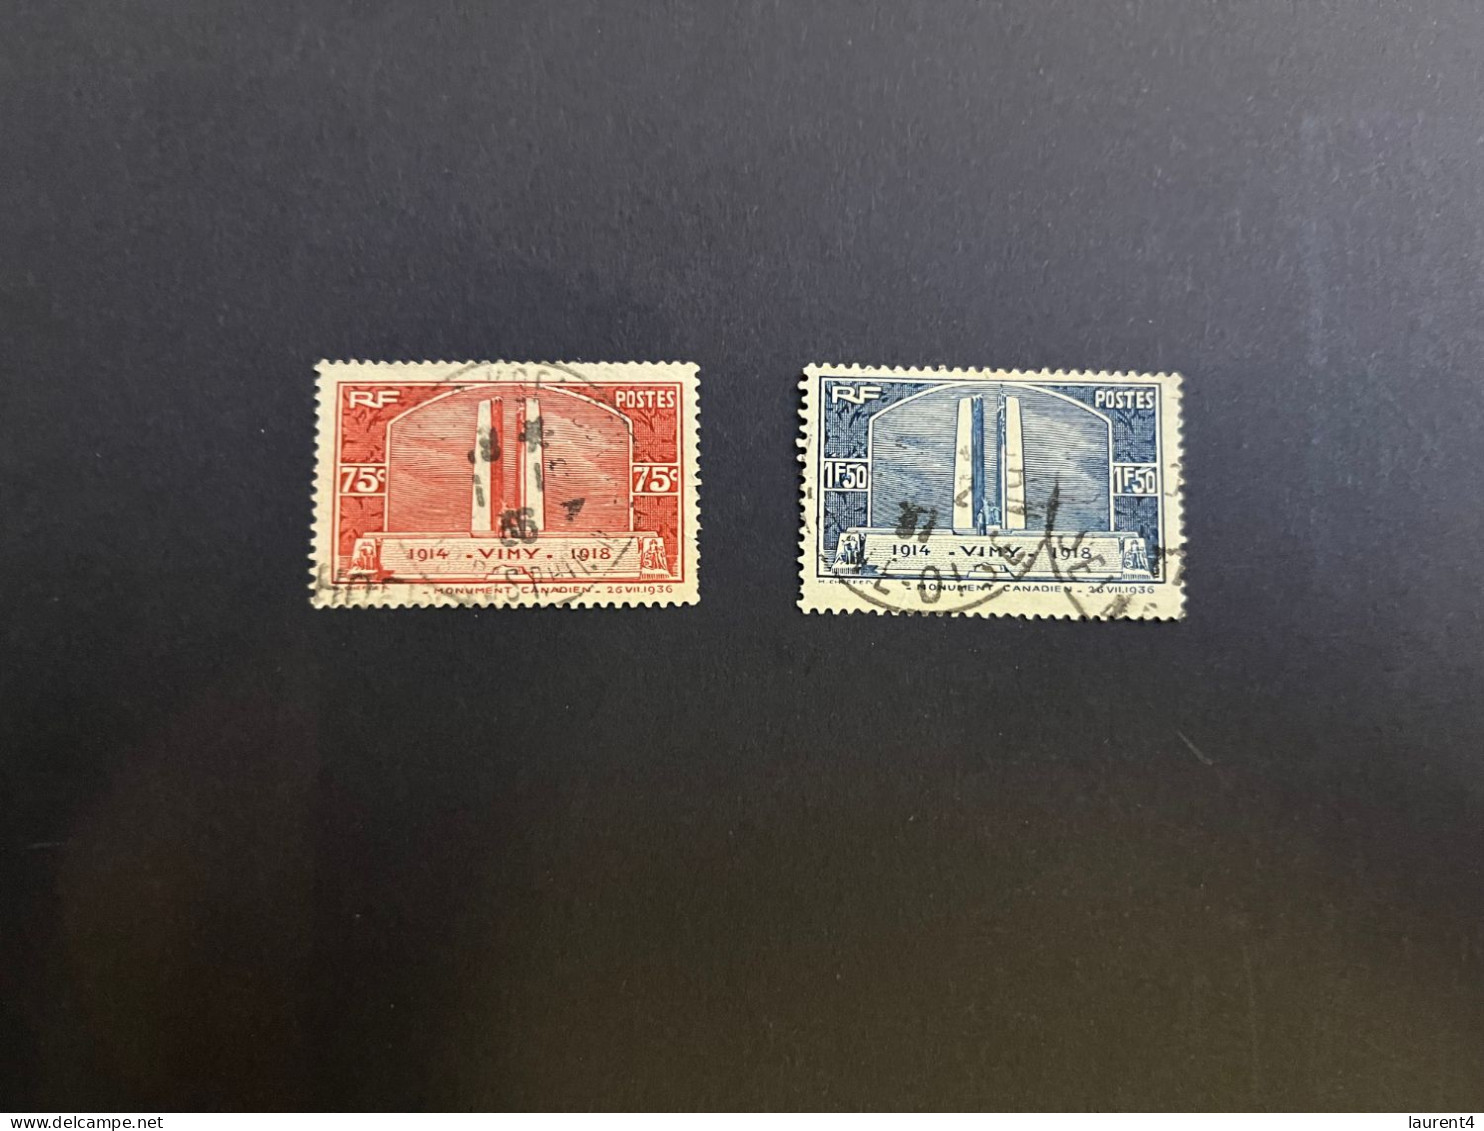 20-4-2024 (stamp) 2 Used Stamp - FRANCE - Vimy Memorial - Used Stamps